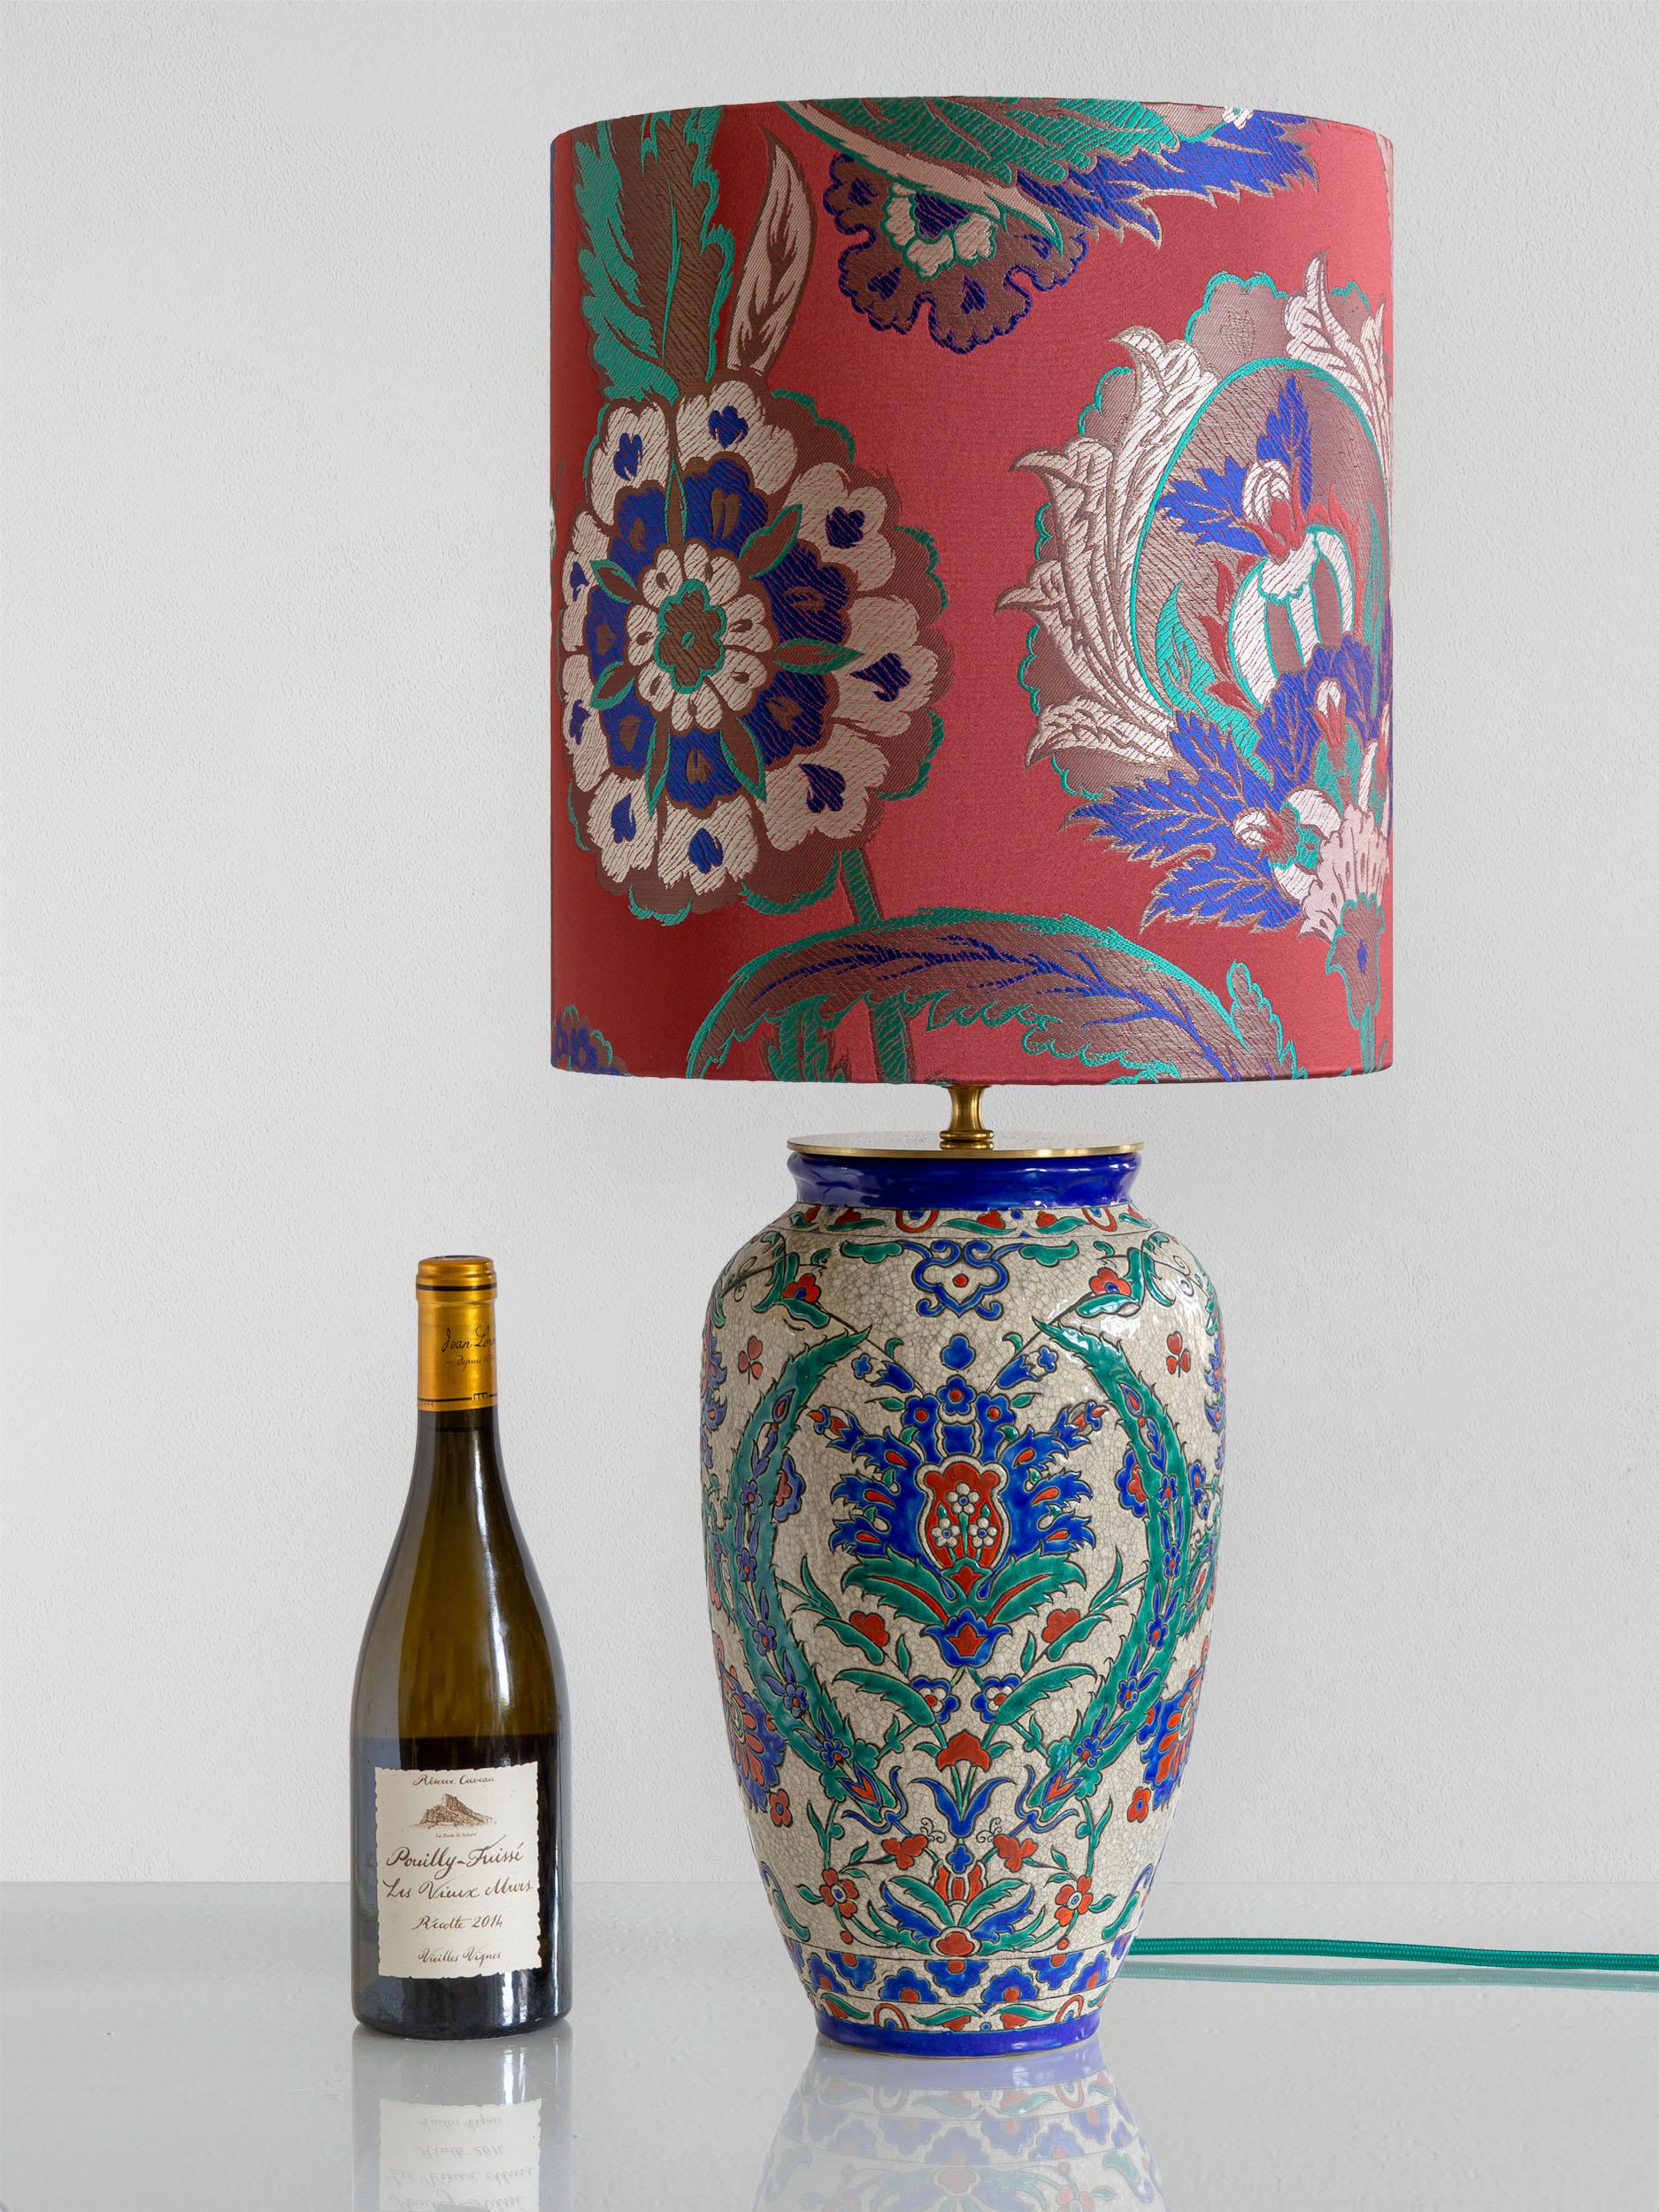 Introducing Marmara, a one-of-a-kind lamp masterfully crafted from an antique Art Deco ceramic cloisonné vase, designed by Raymond Chevallier in the 